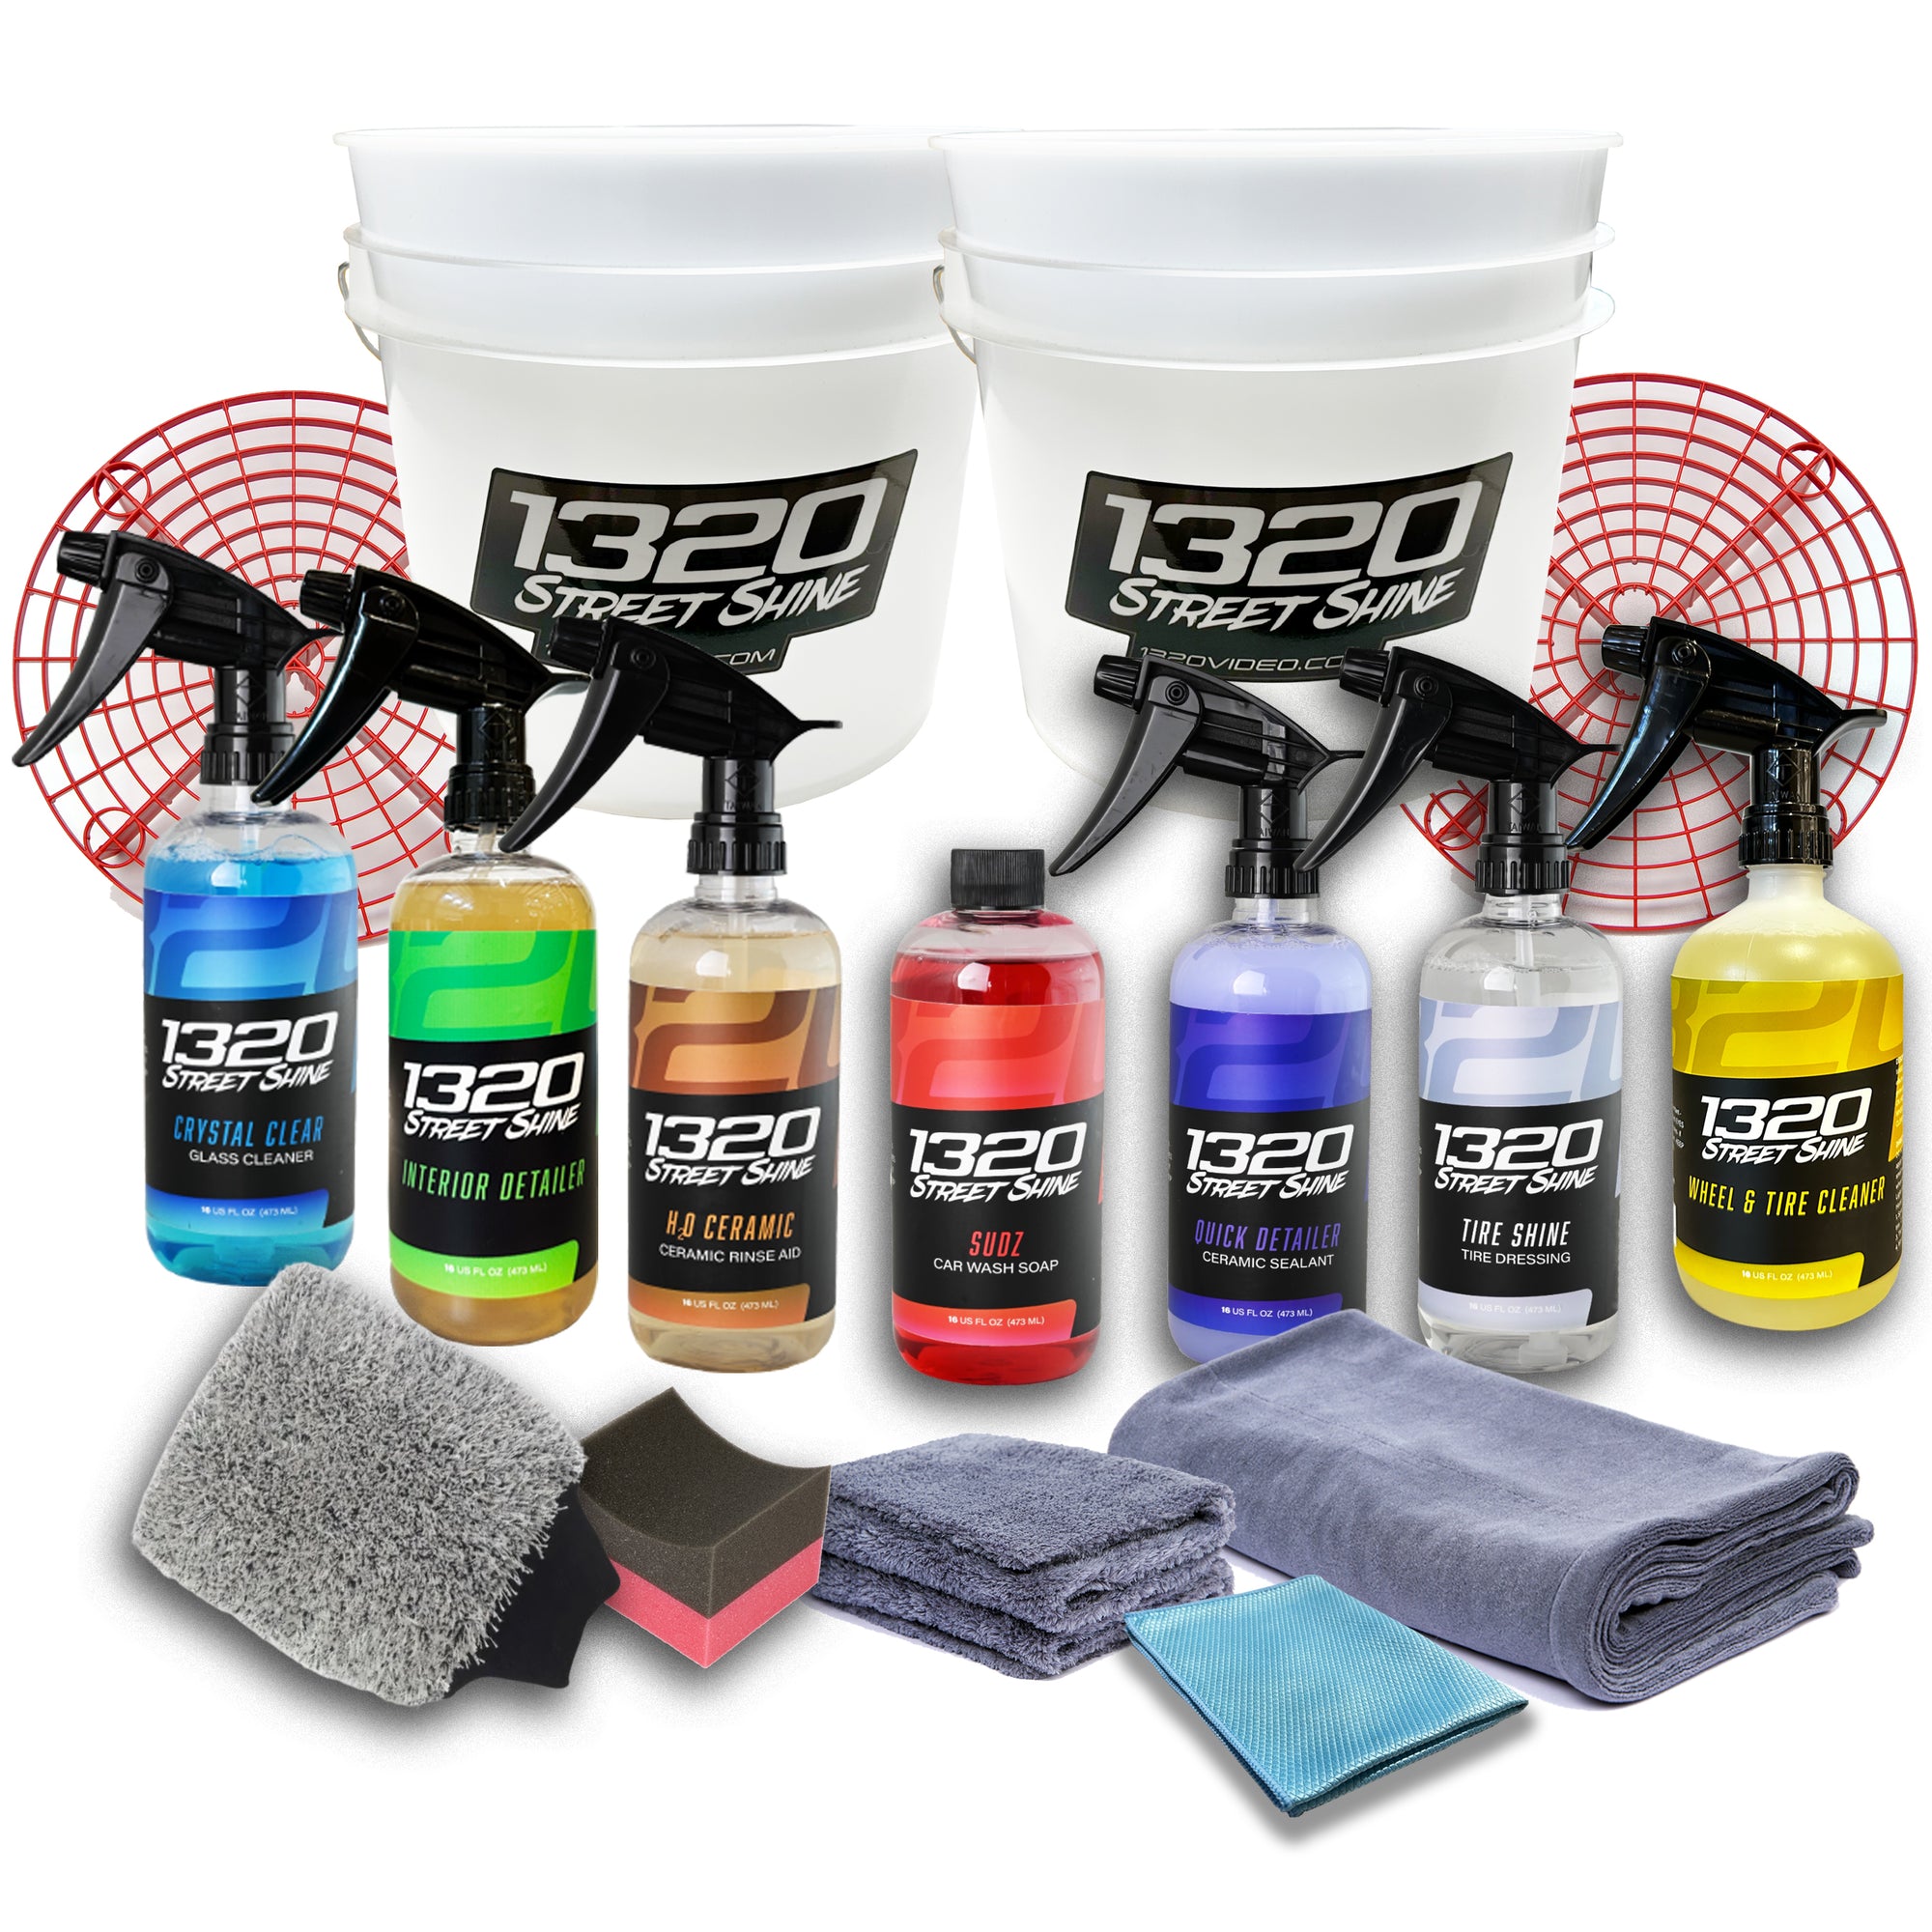 Deluxe Home Wash Kit